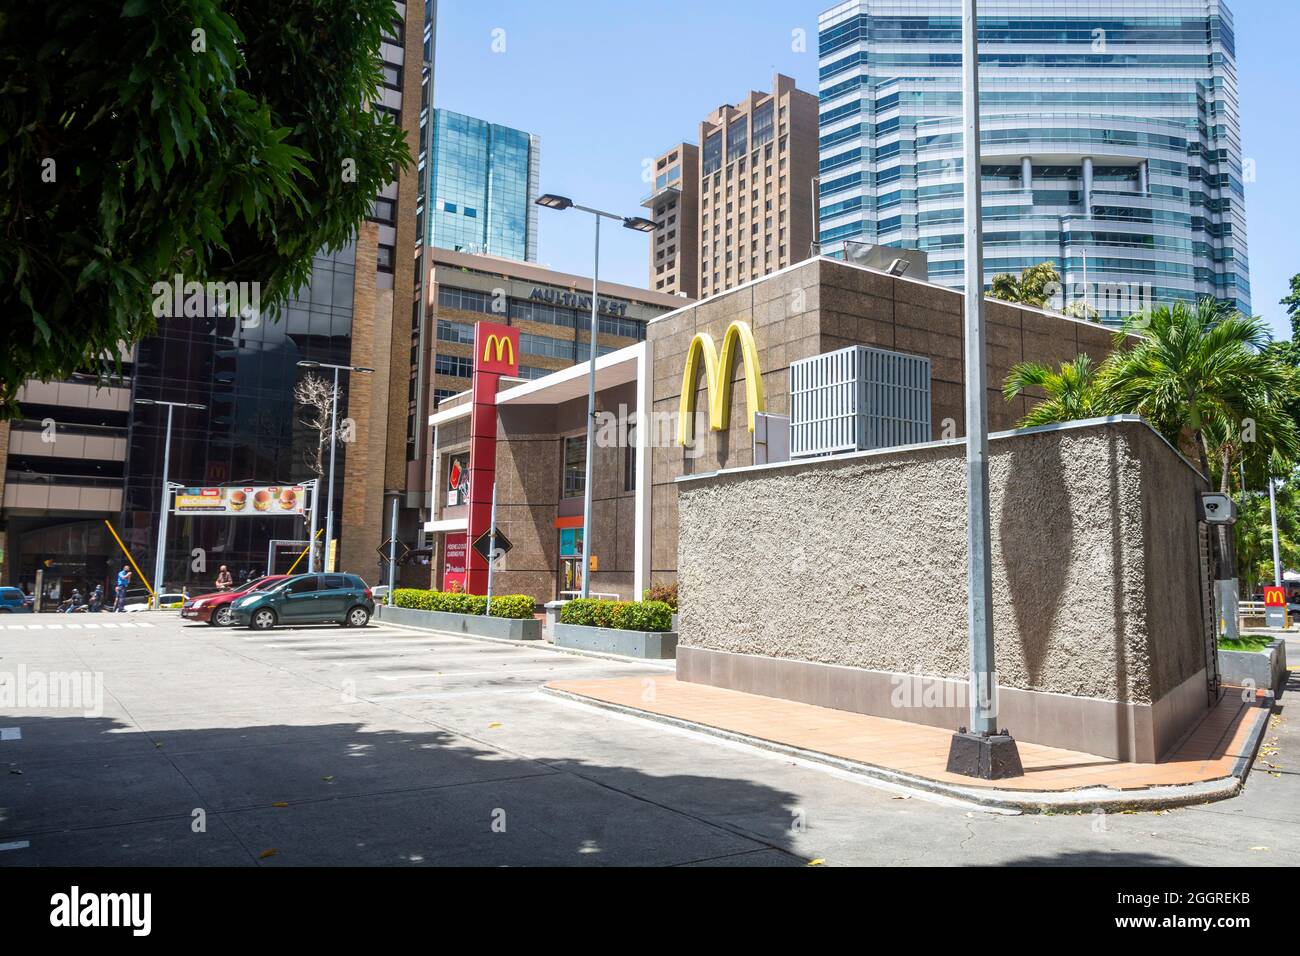 In Venezuela, due to the problems of inflation and monetary mismatch, eating a Big Mac hamburger is a luxury, since it is equivalent to 3 to 4 times t Stock Photo